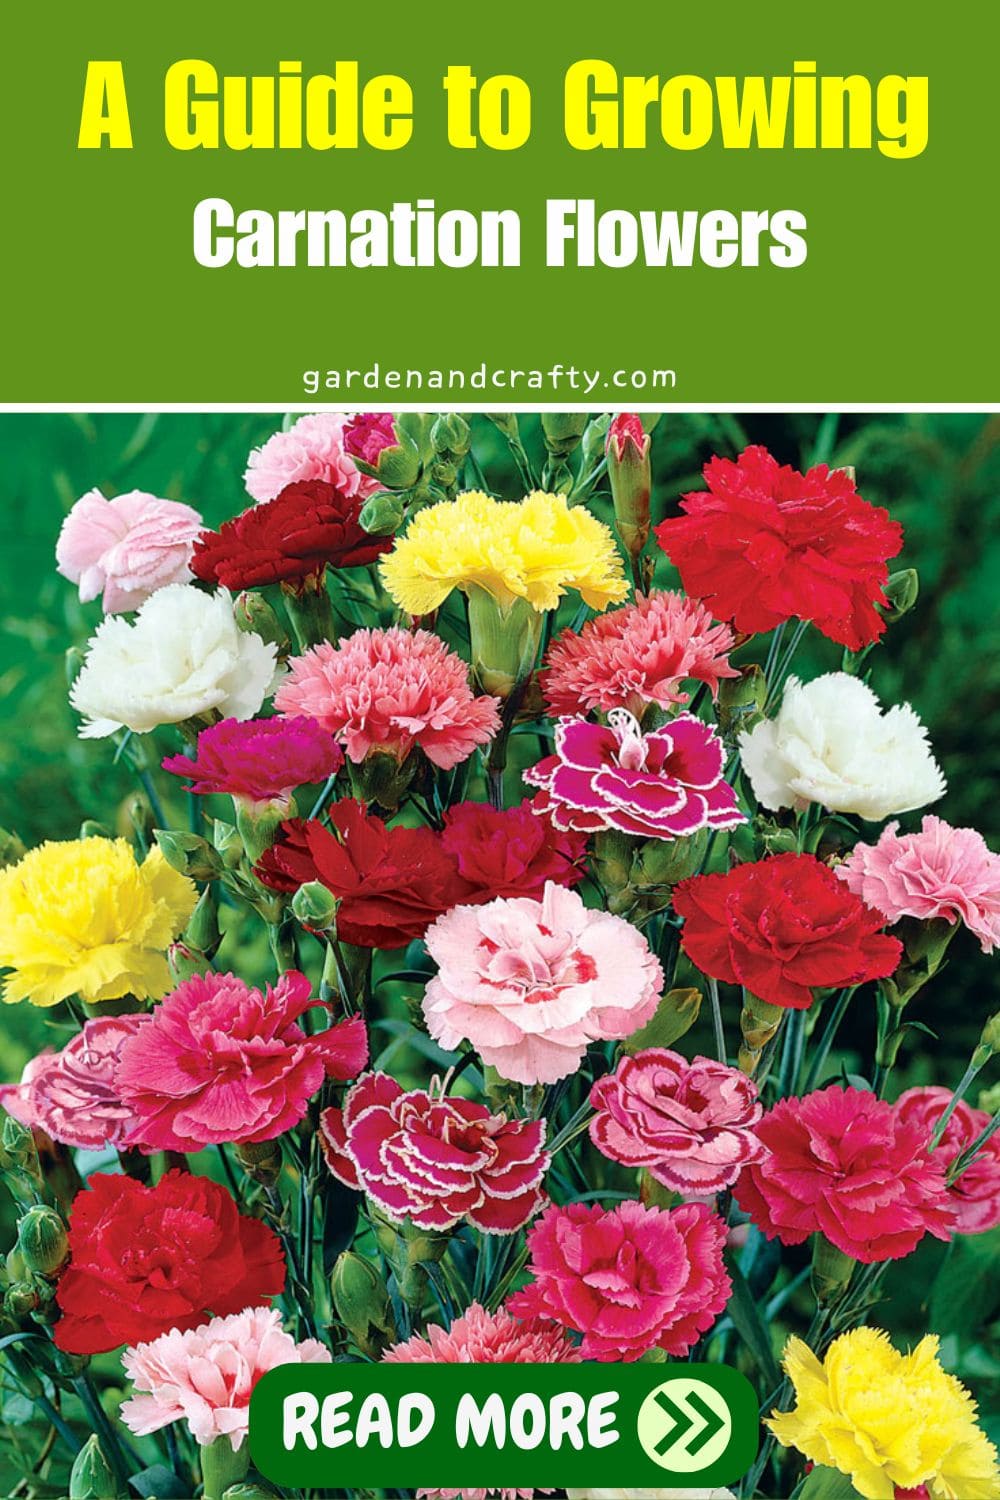 A Guide to Growing Carnation Flowers